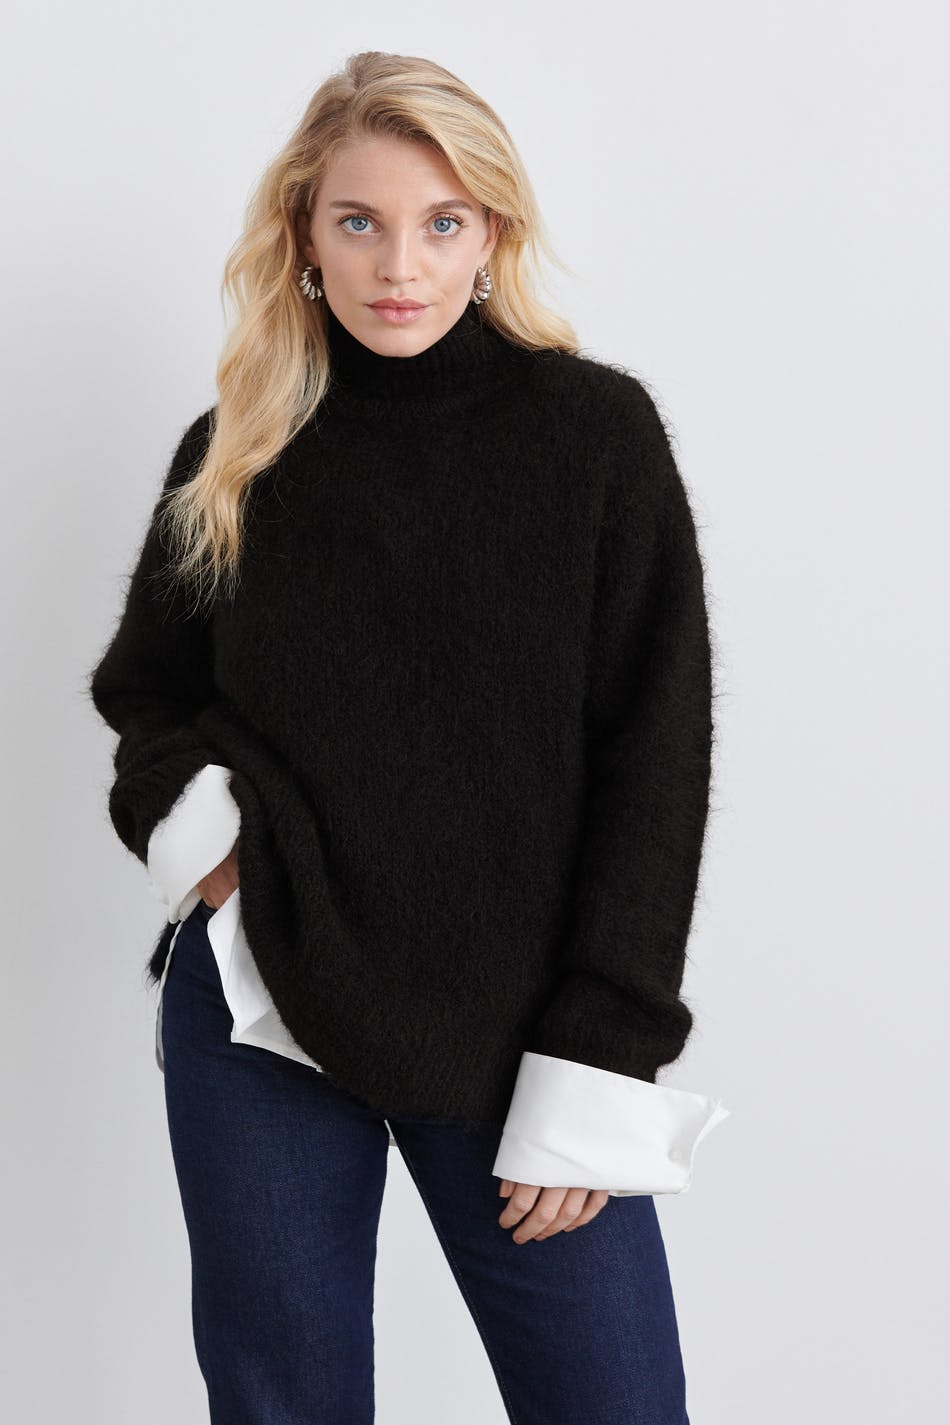 Rome knitted sweater